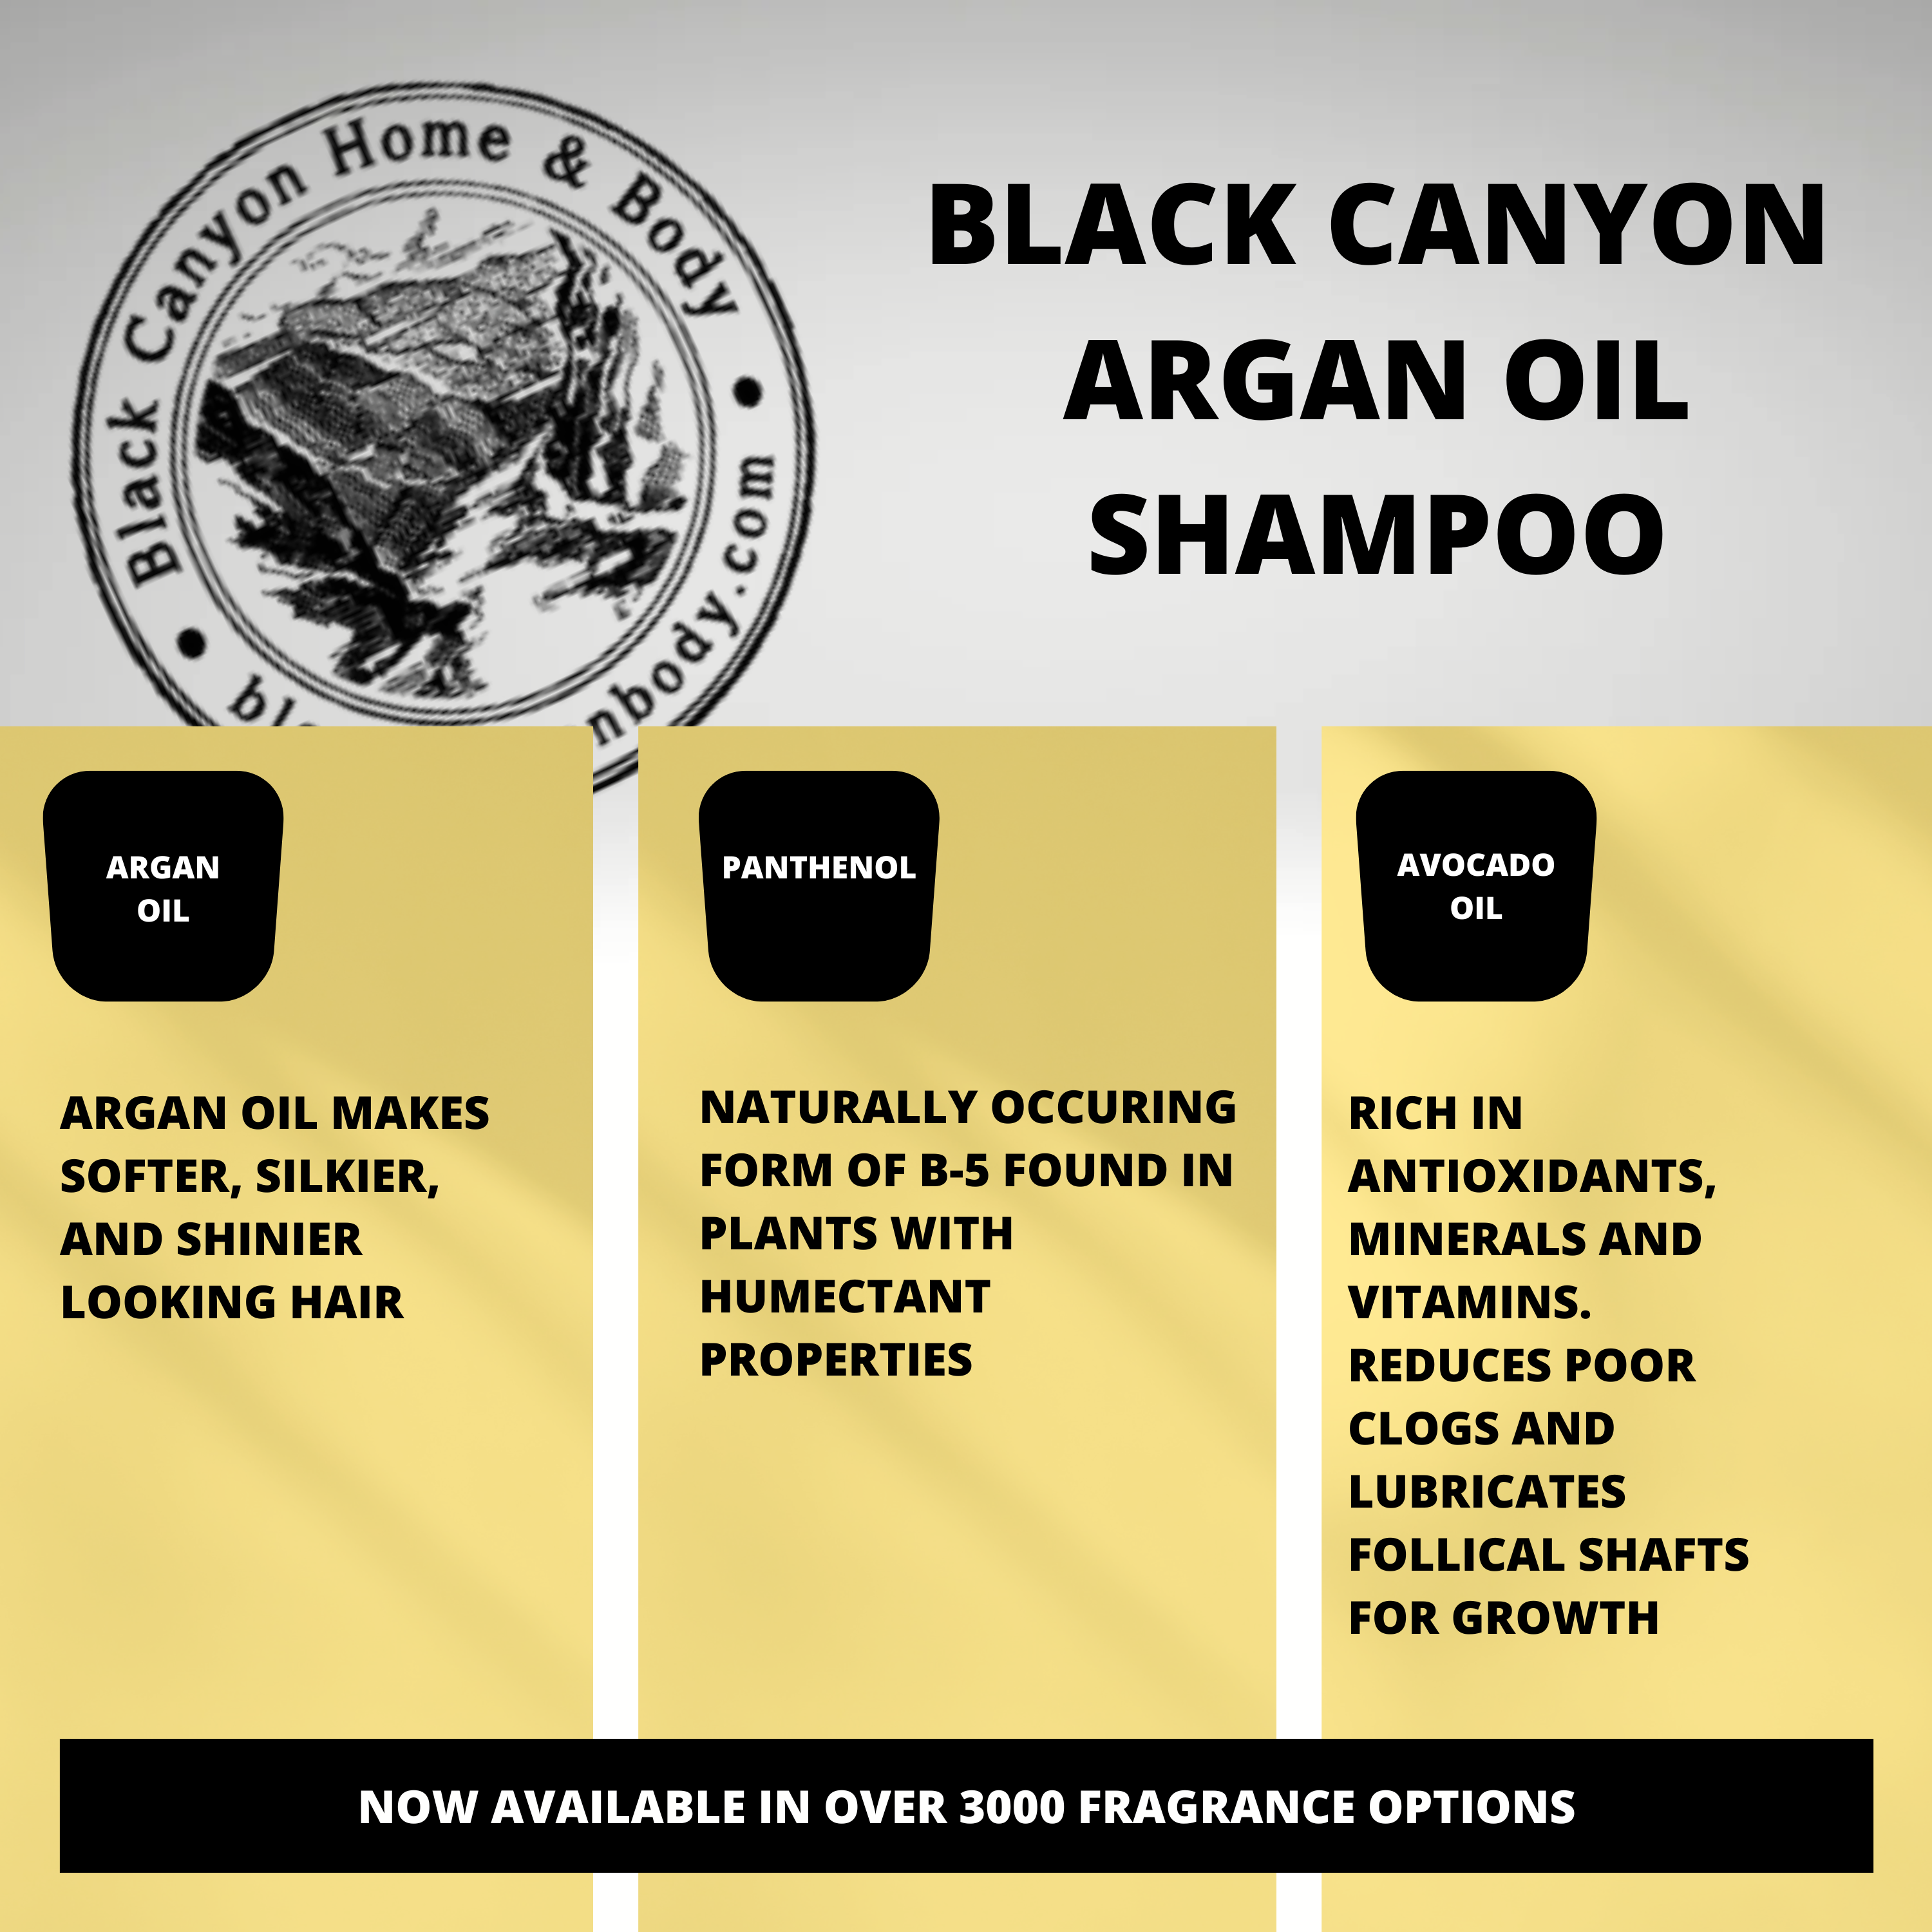 Black Canyon Carrot Cake Scented Shampoo with Argan Oil